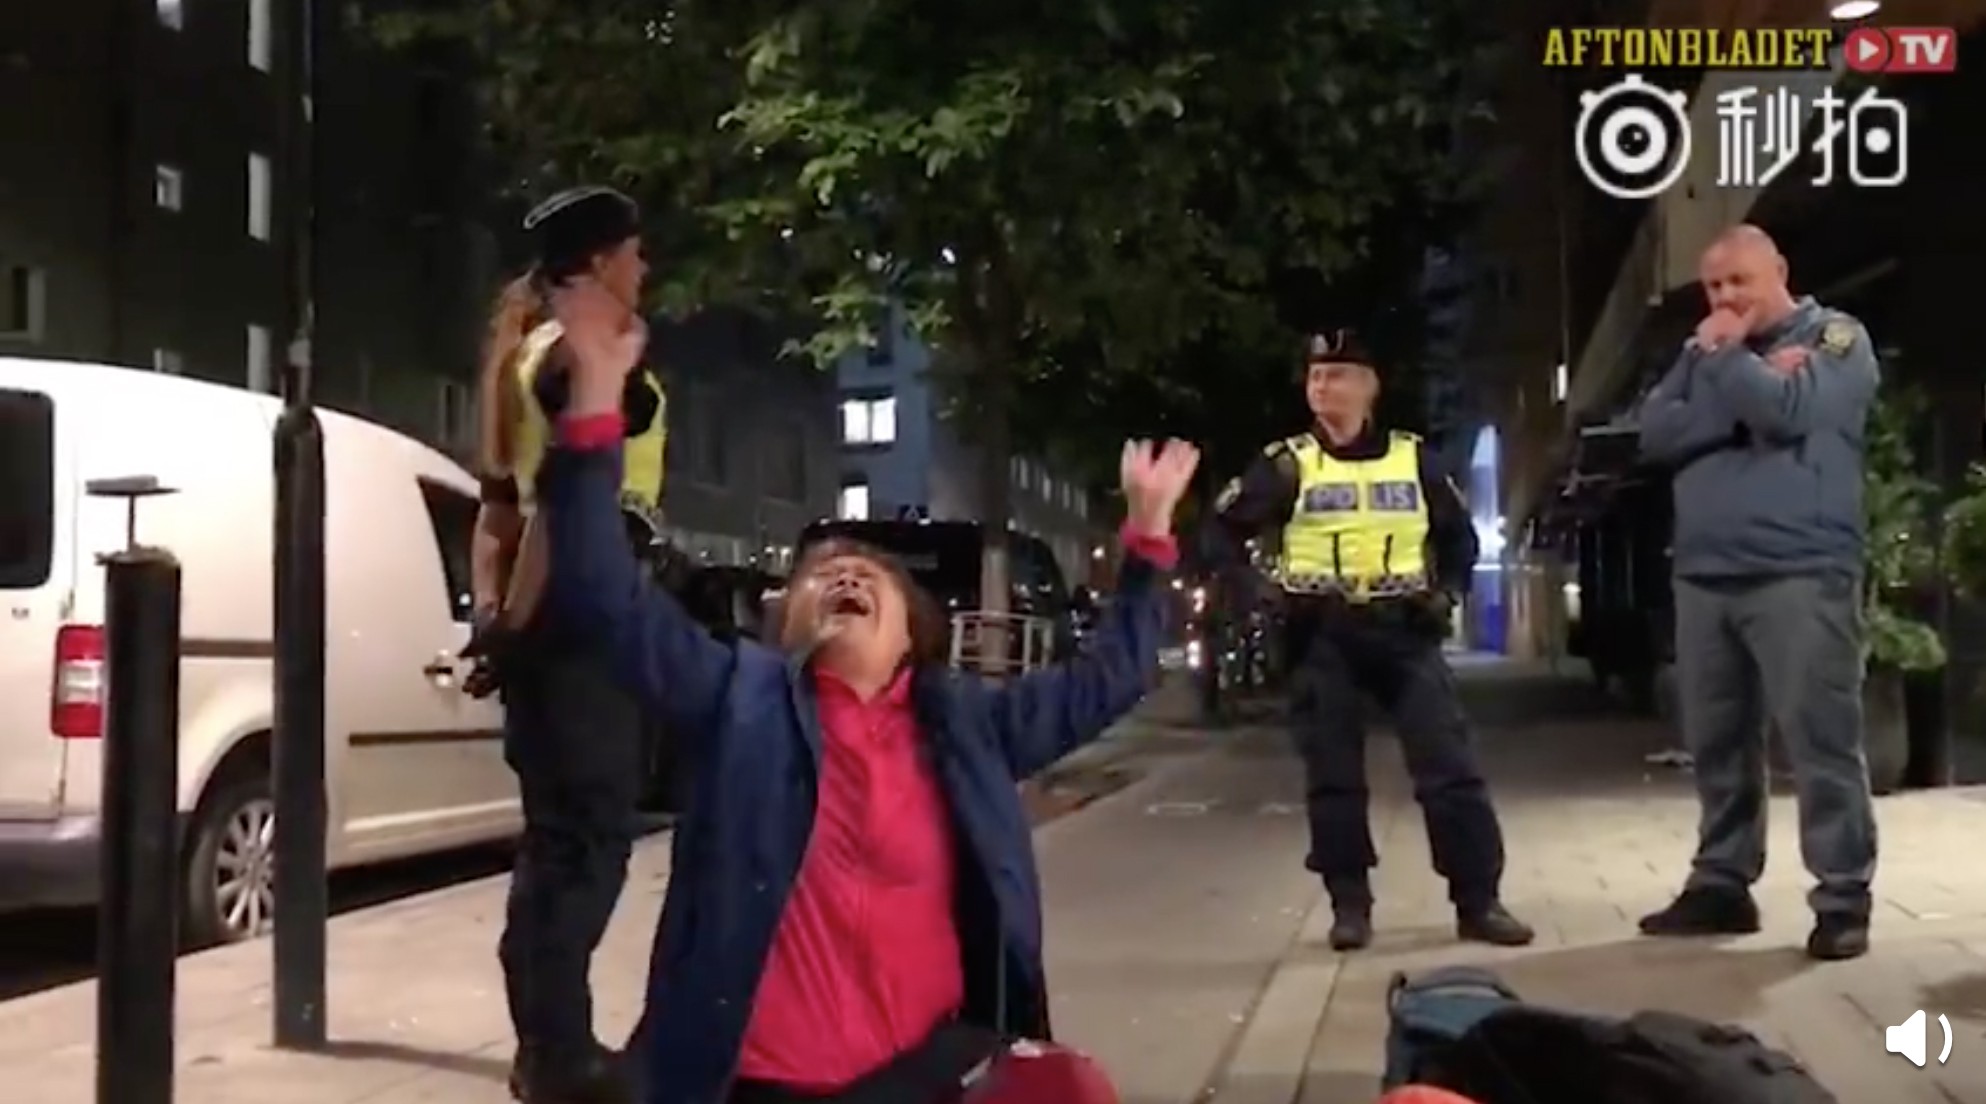 A Chinese tourist drops to the ground outside a hotel in Stockholm during an incident in September that prompted 11 critical statements from the embassy. Photo: Handout